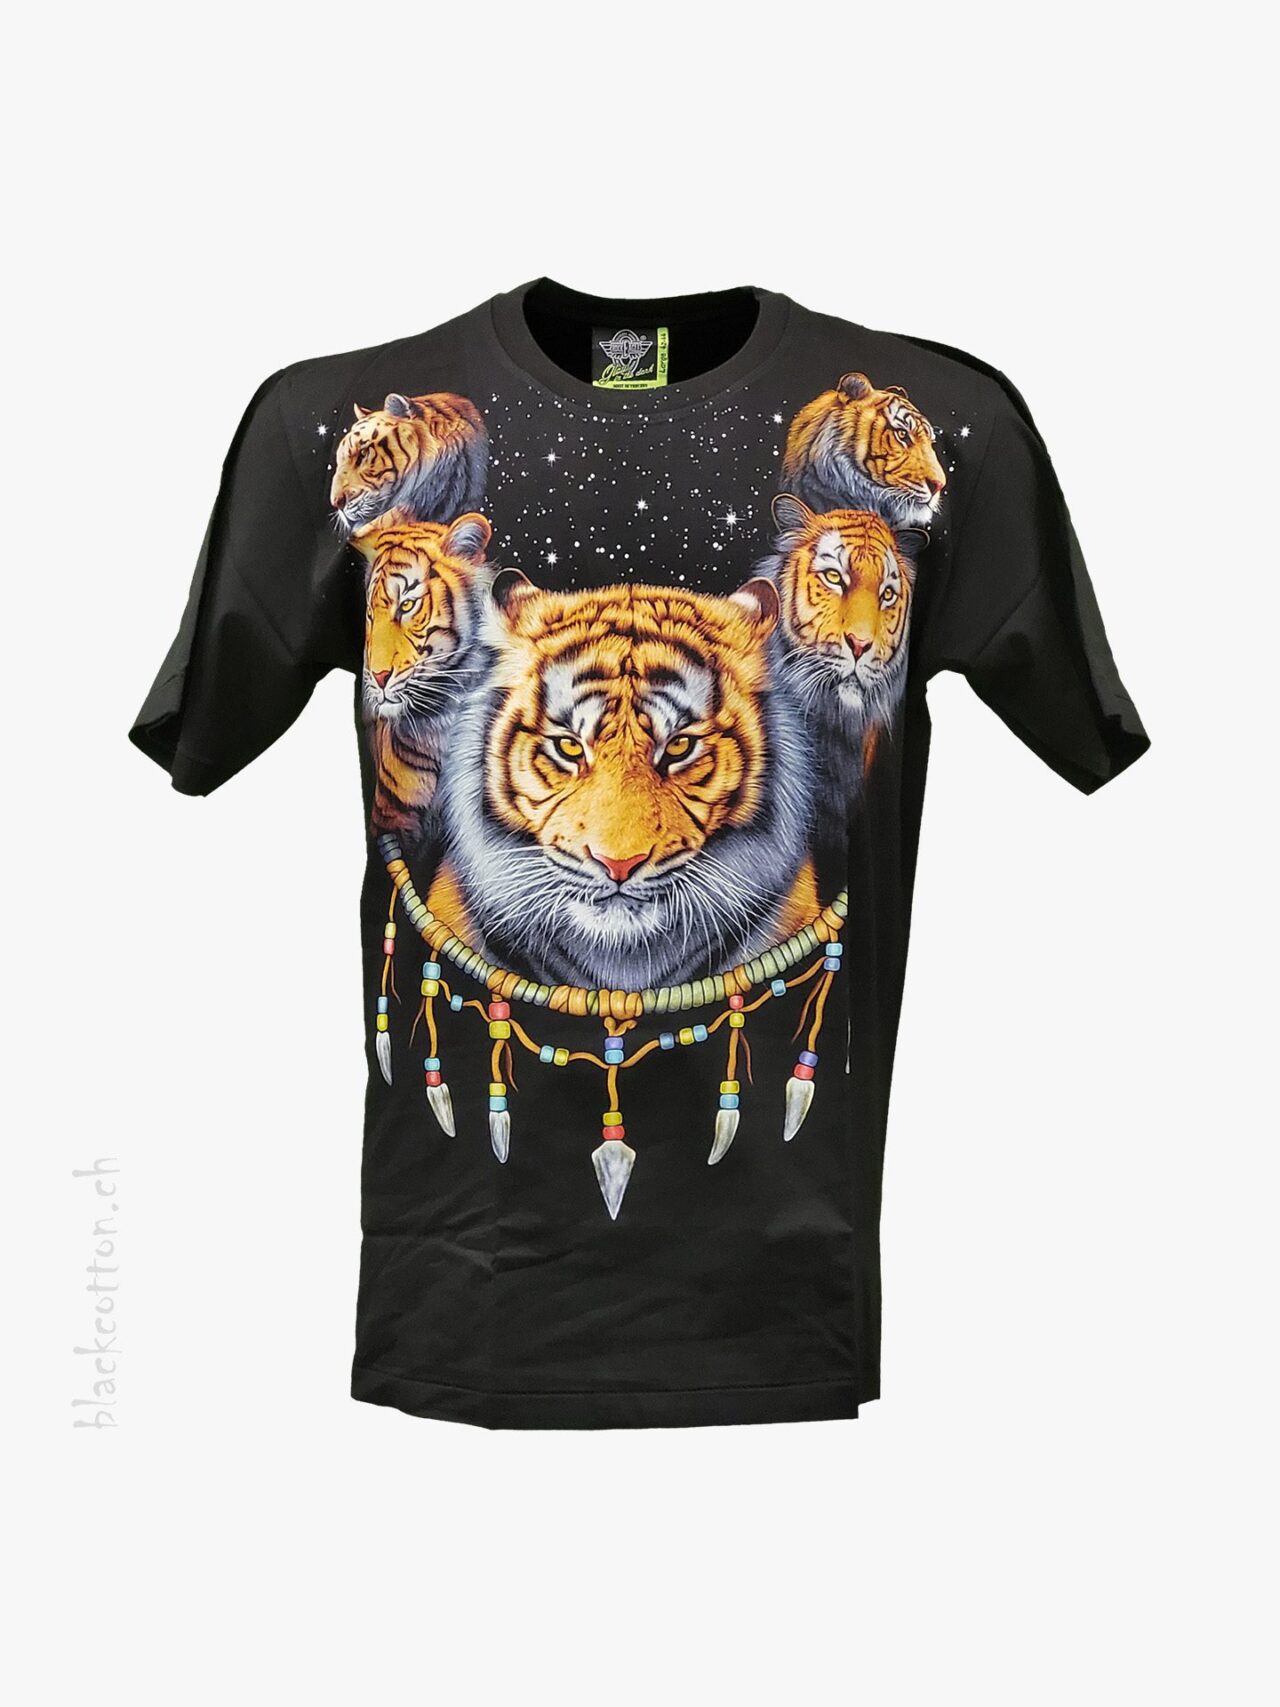 T-Shirt Tiger Traumfänger Glow-in-the-Dark ROCK EAGLE